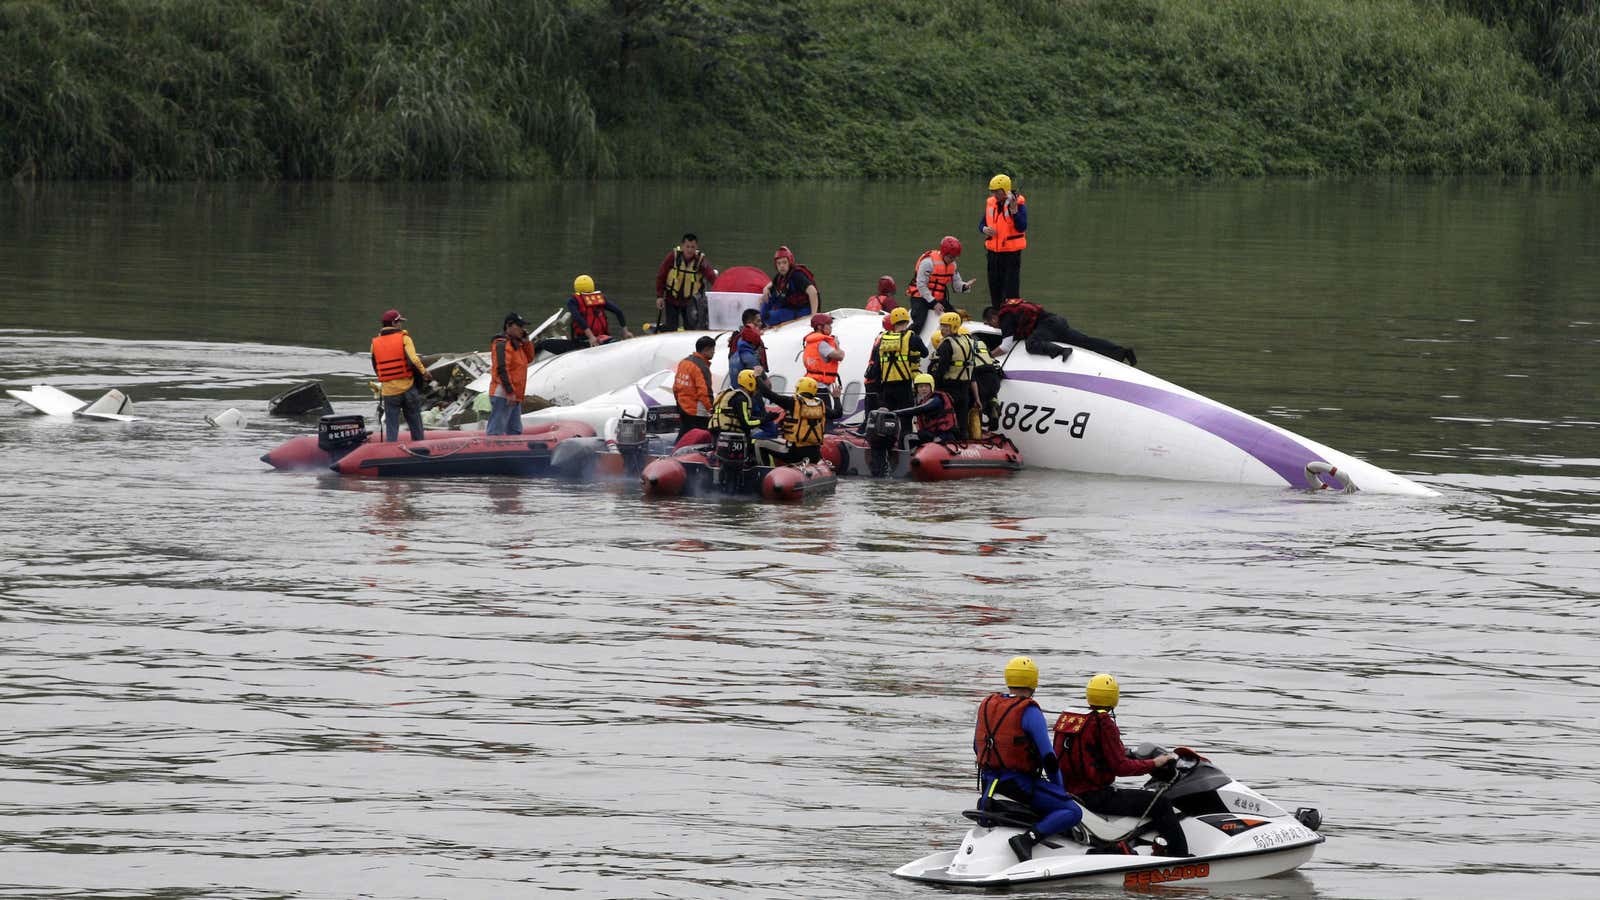 Emergeny responders carry out a rescue operation after a TransAsia Airways plane crash landed in a river near Taipei.